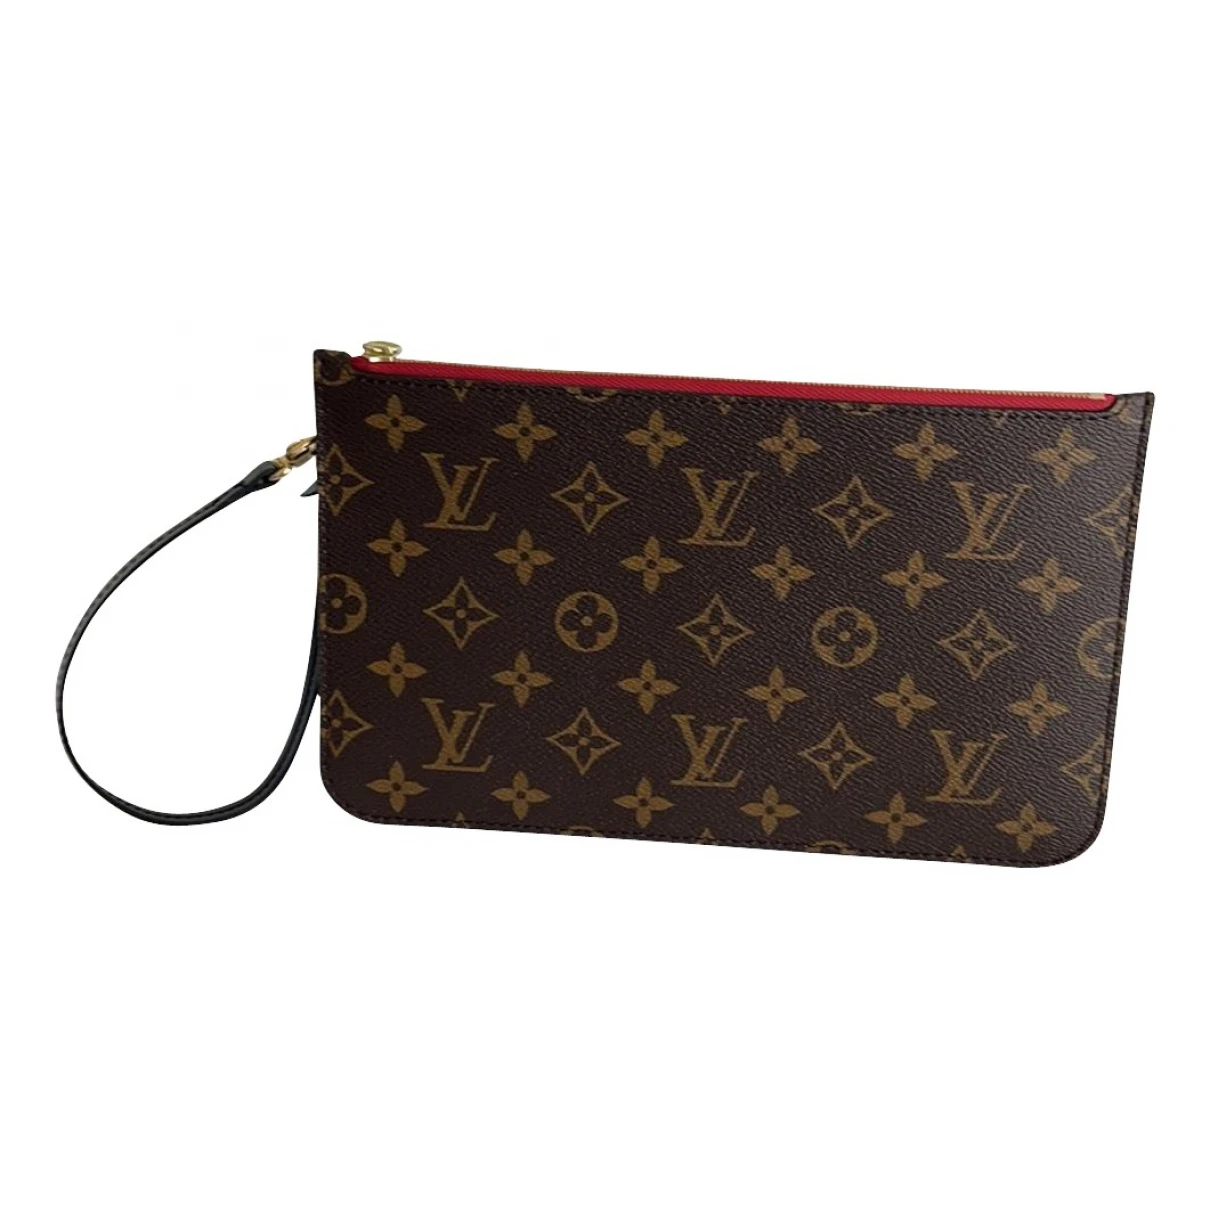 bags Louis Vuitton handbags Abbesses Messenger for Female Cloth. Used condition